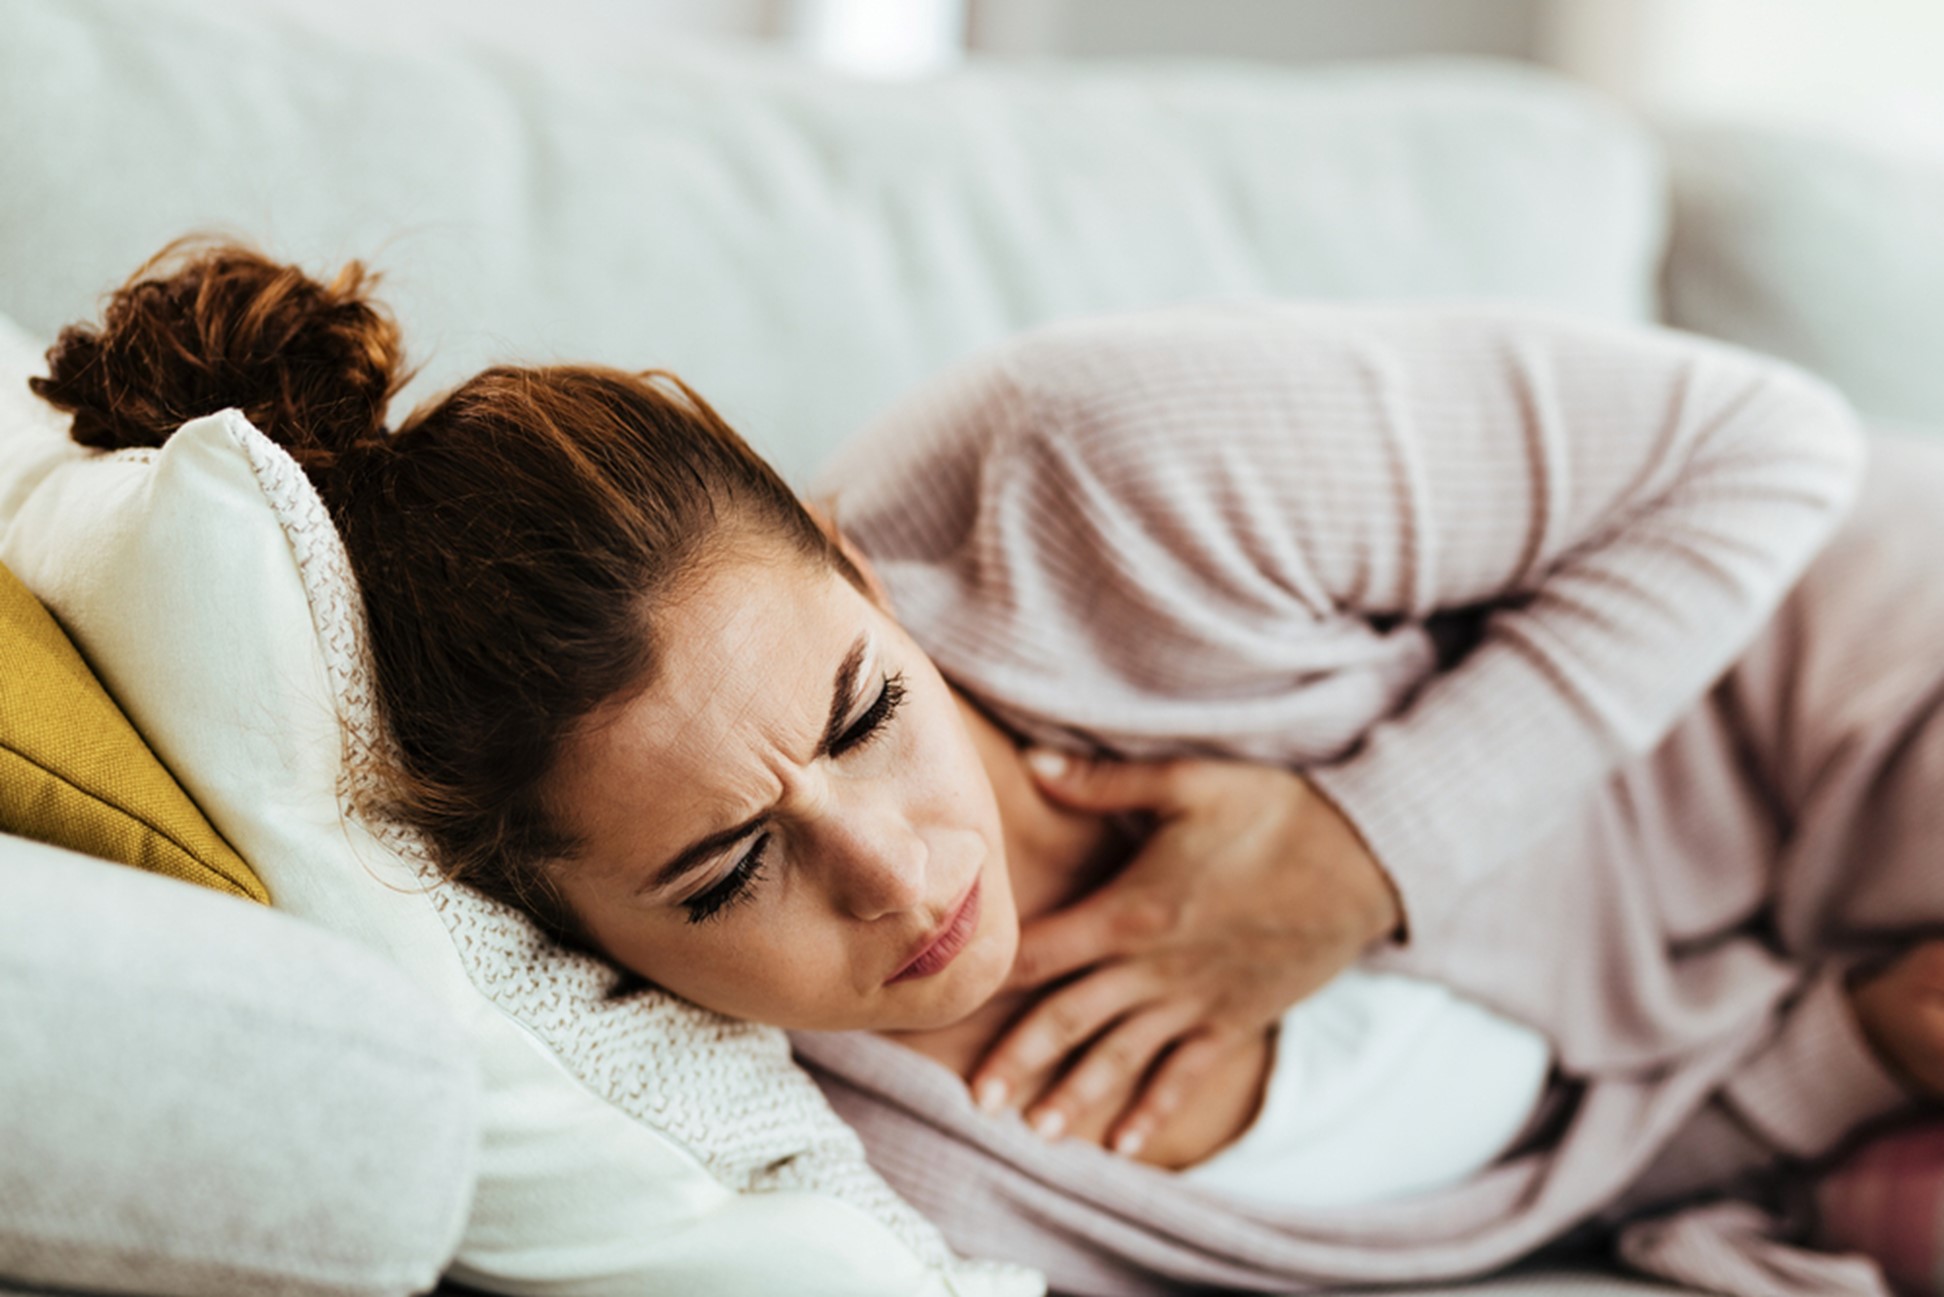 A woman gripping her chest in pain as she lays on the sofa.